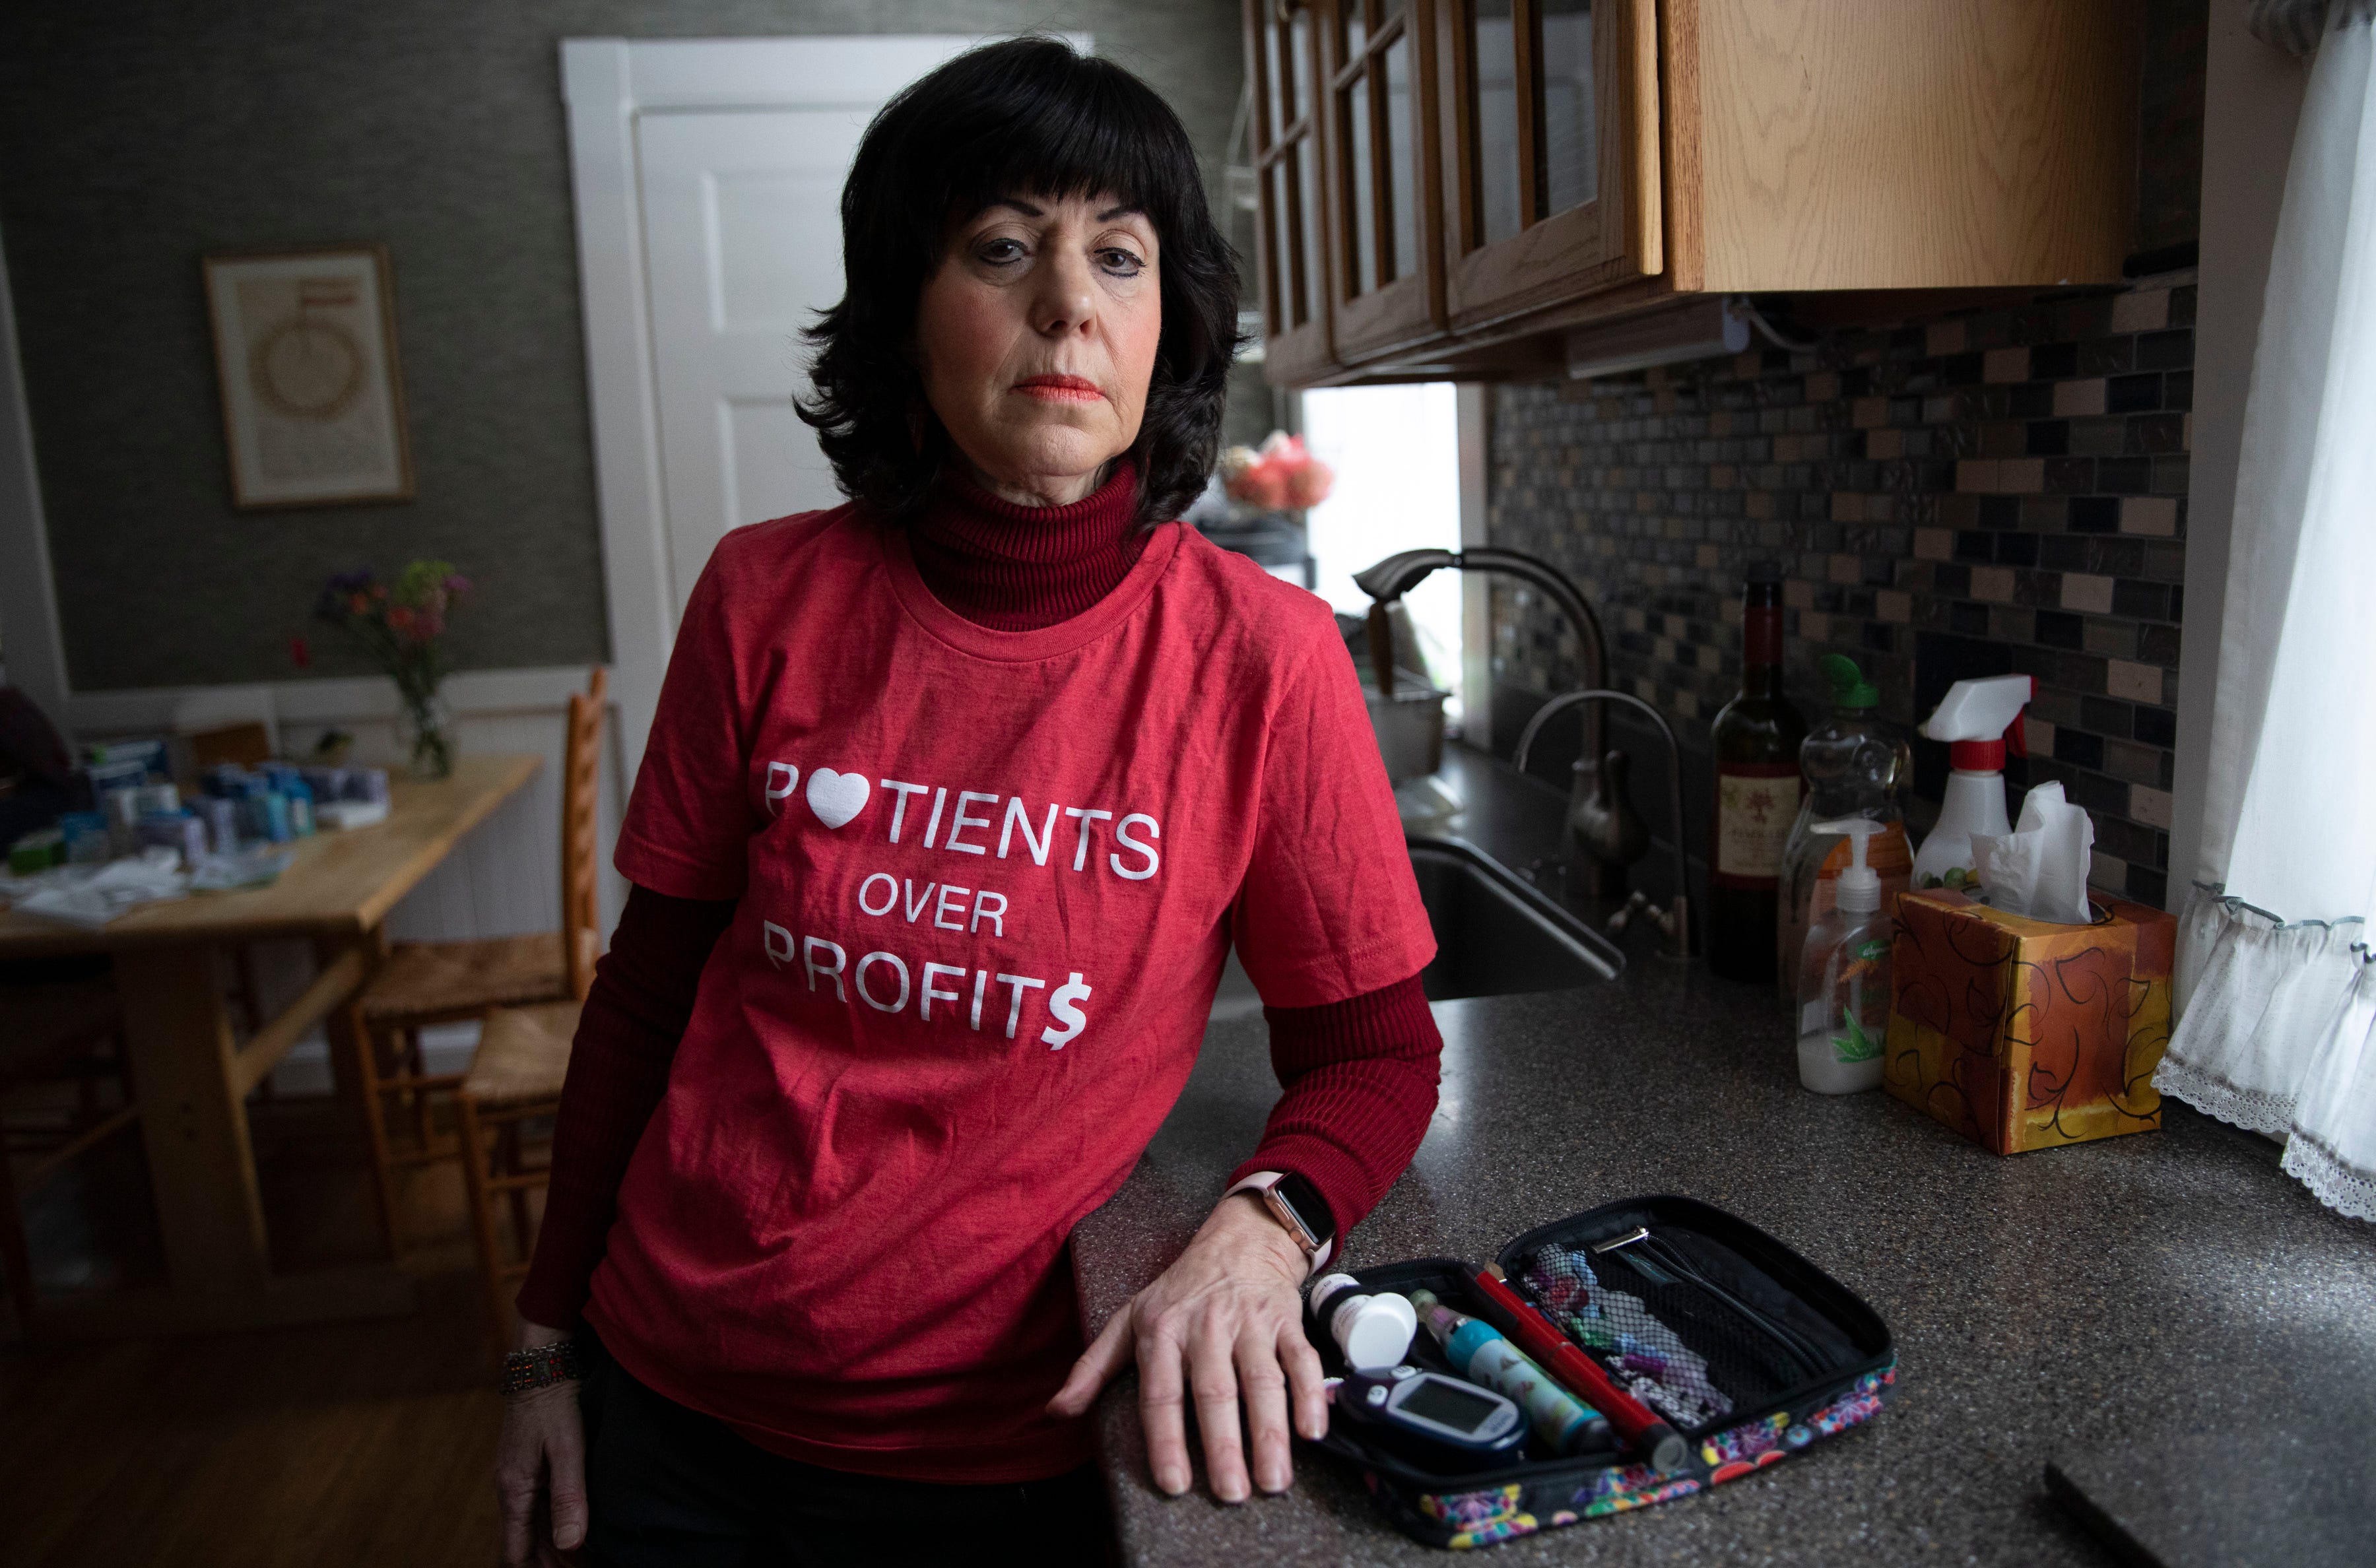 Diedre Waxman lives in Newton, Mass., and has Type 1 diabetes. Diagnosed six years ago, Waxman has adopted a strict diet, so she doesn’t need as much insulin, which she  purchases from Canada.